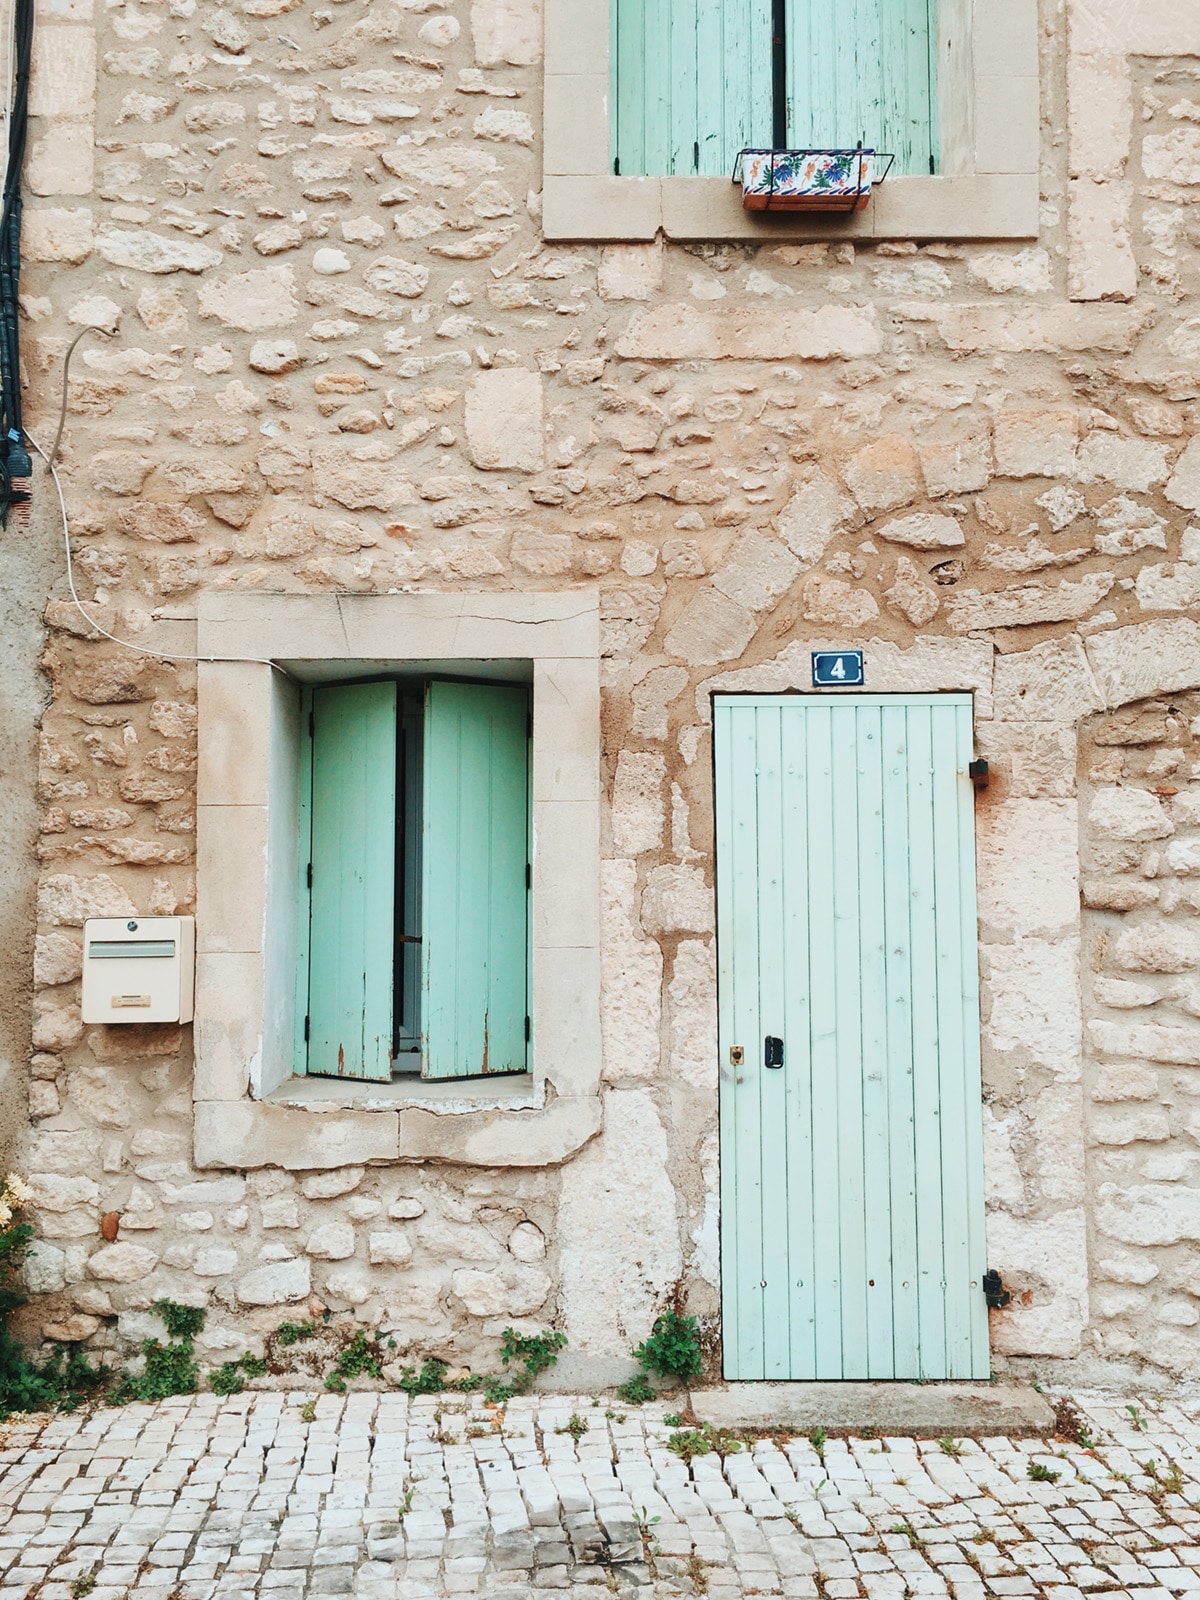 mint green windows and doors in saint remy provence (france) | 24 hour travel guide from coco kelley